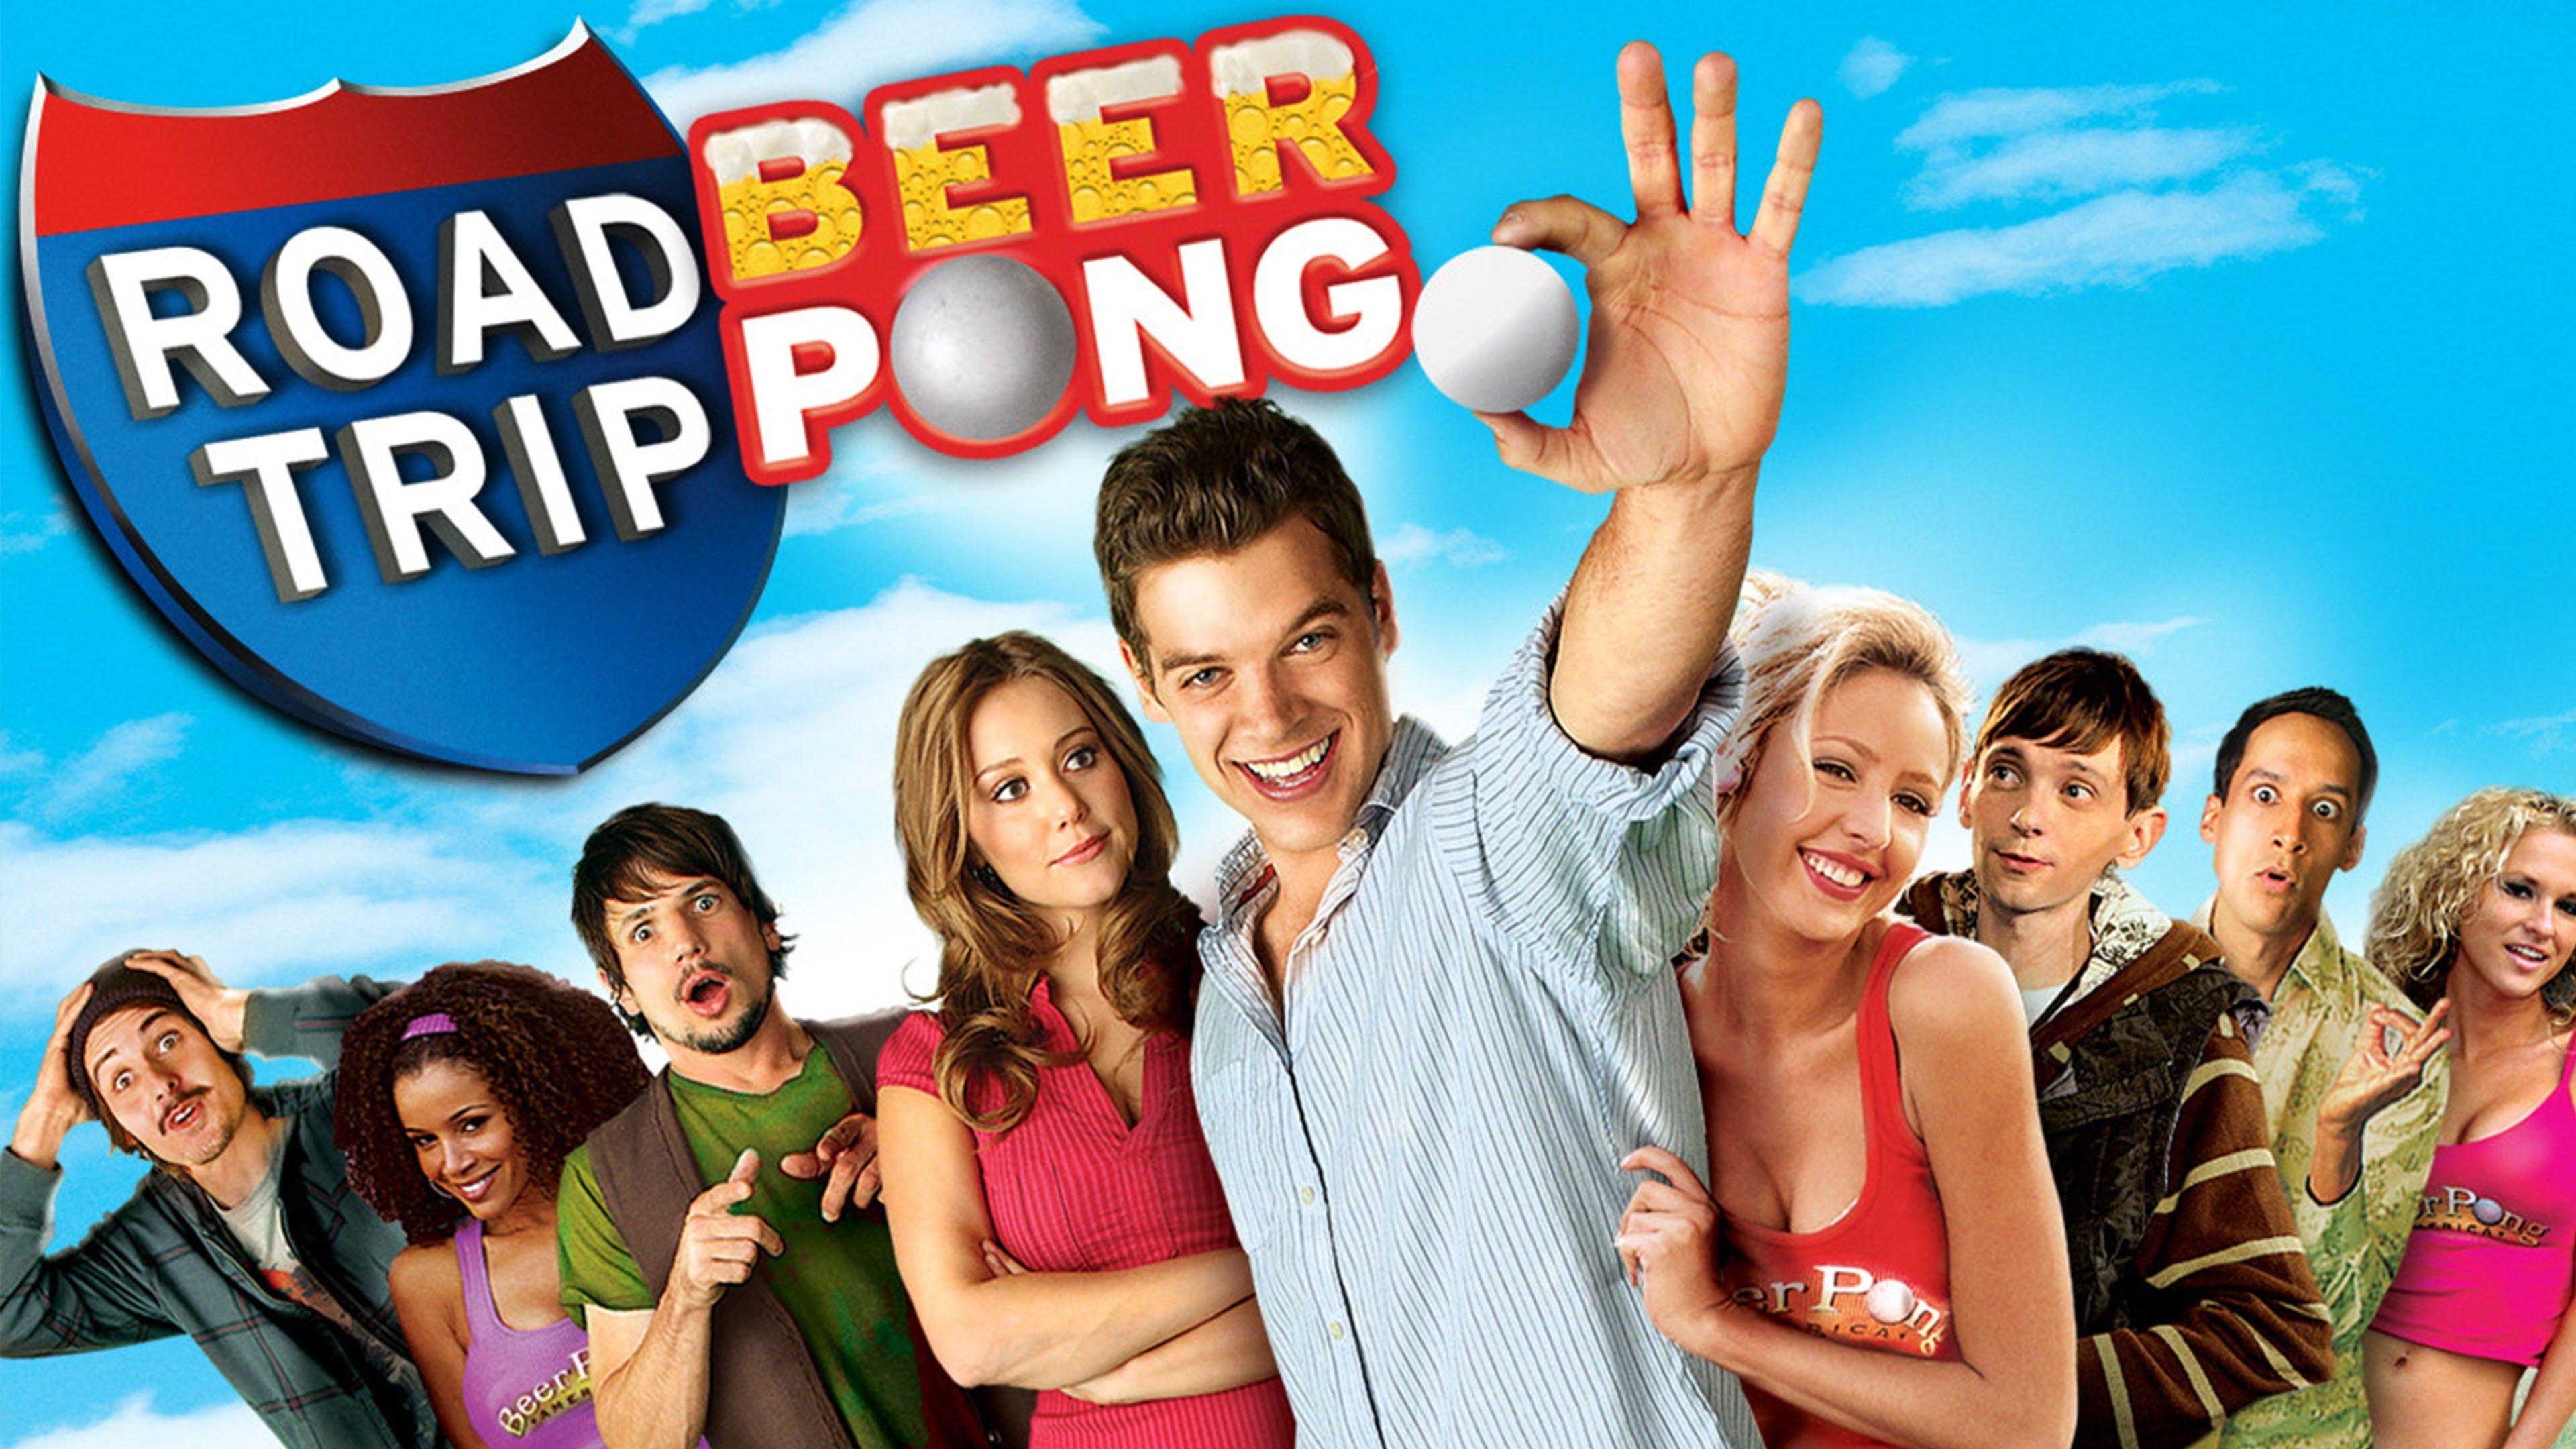 where to watch road trip beer pong